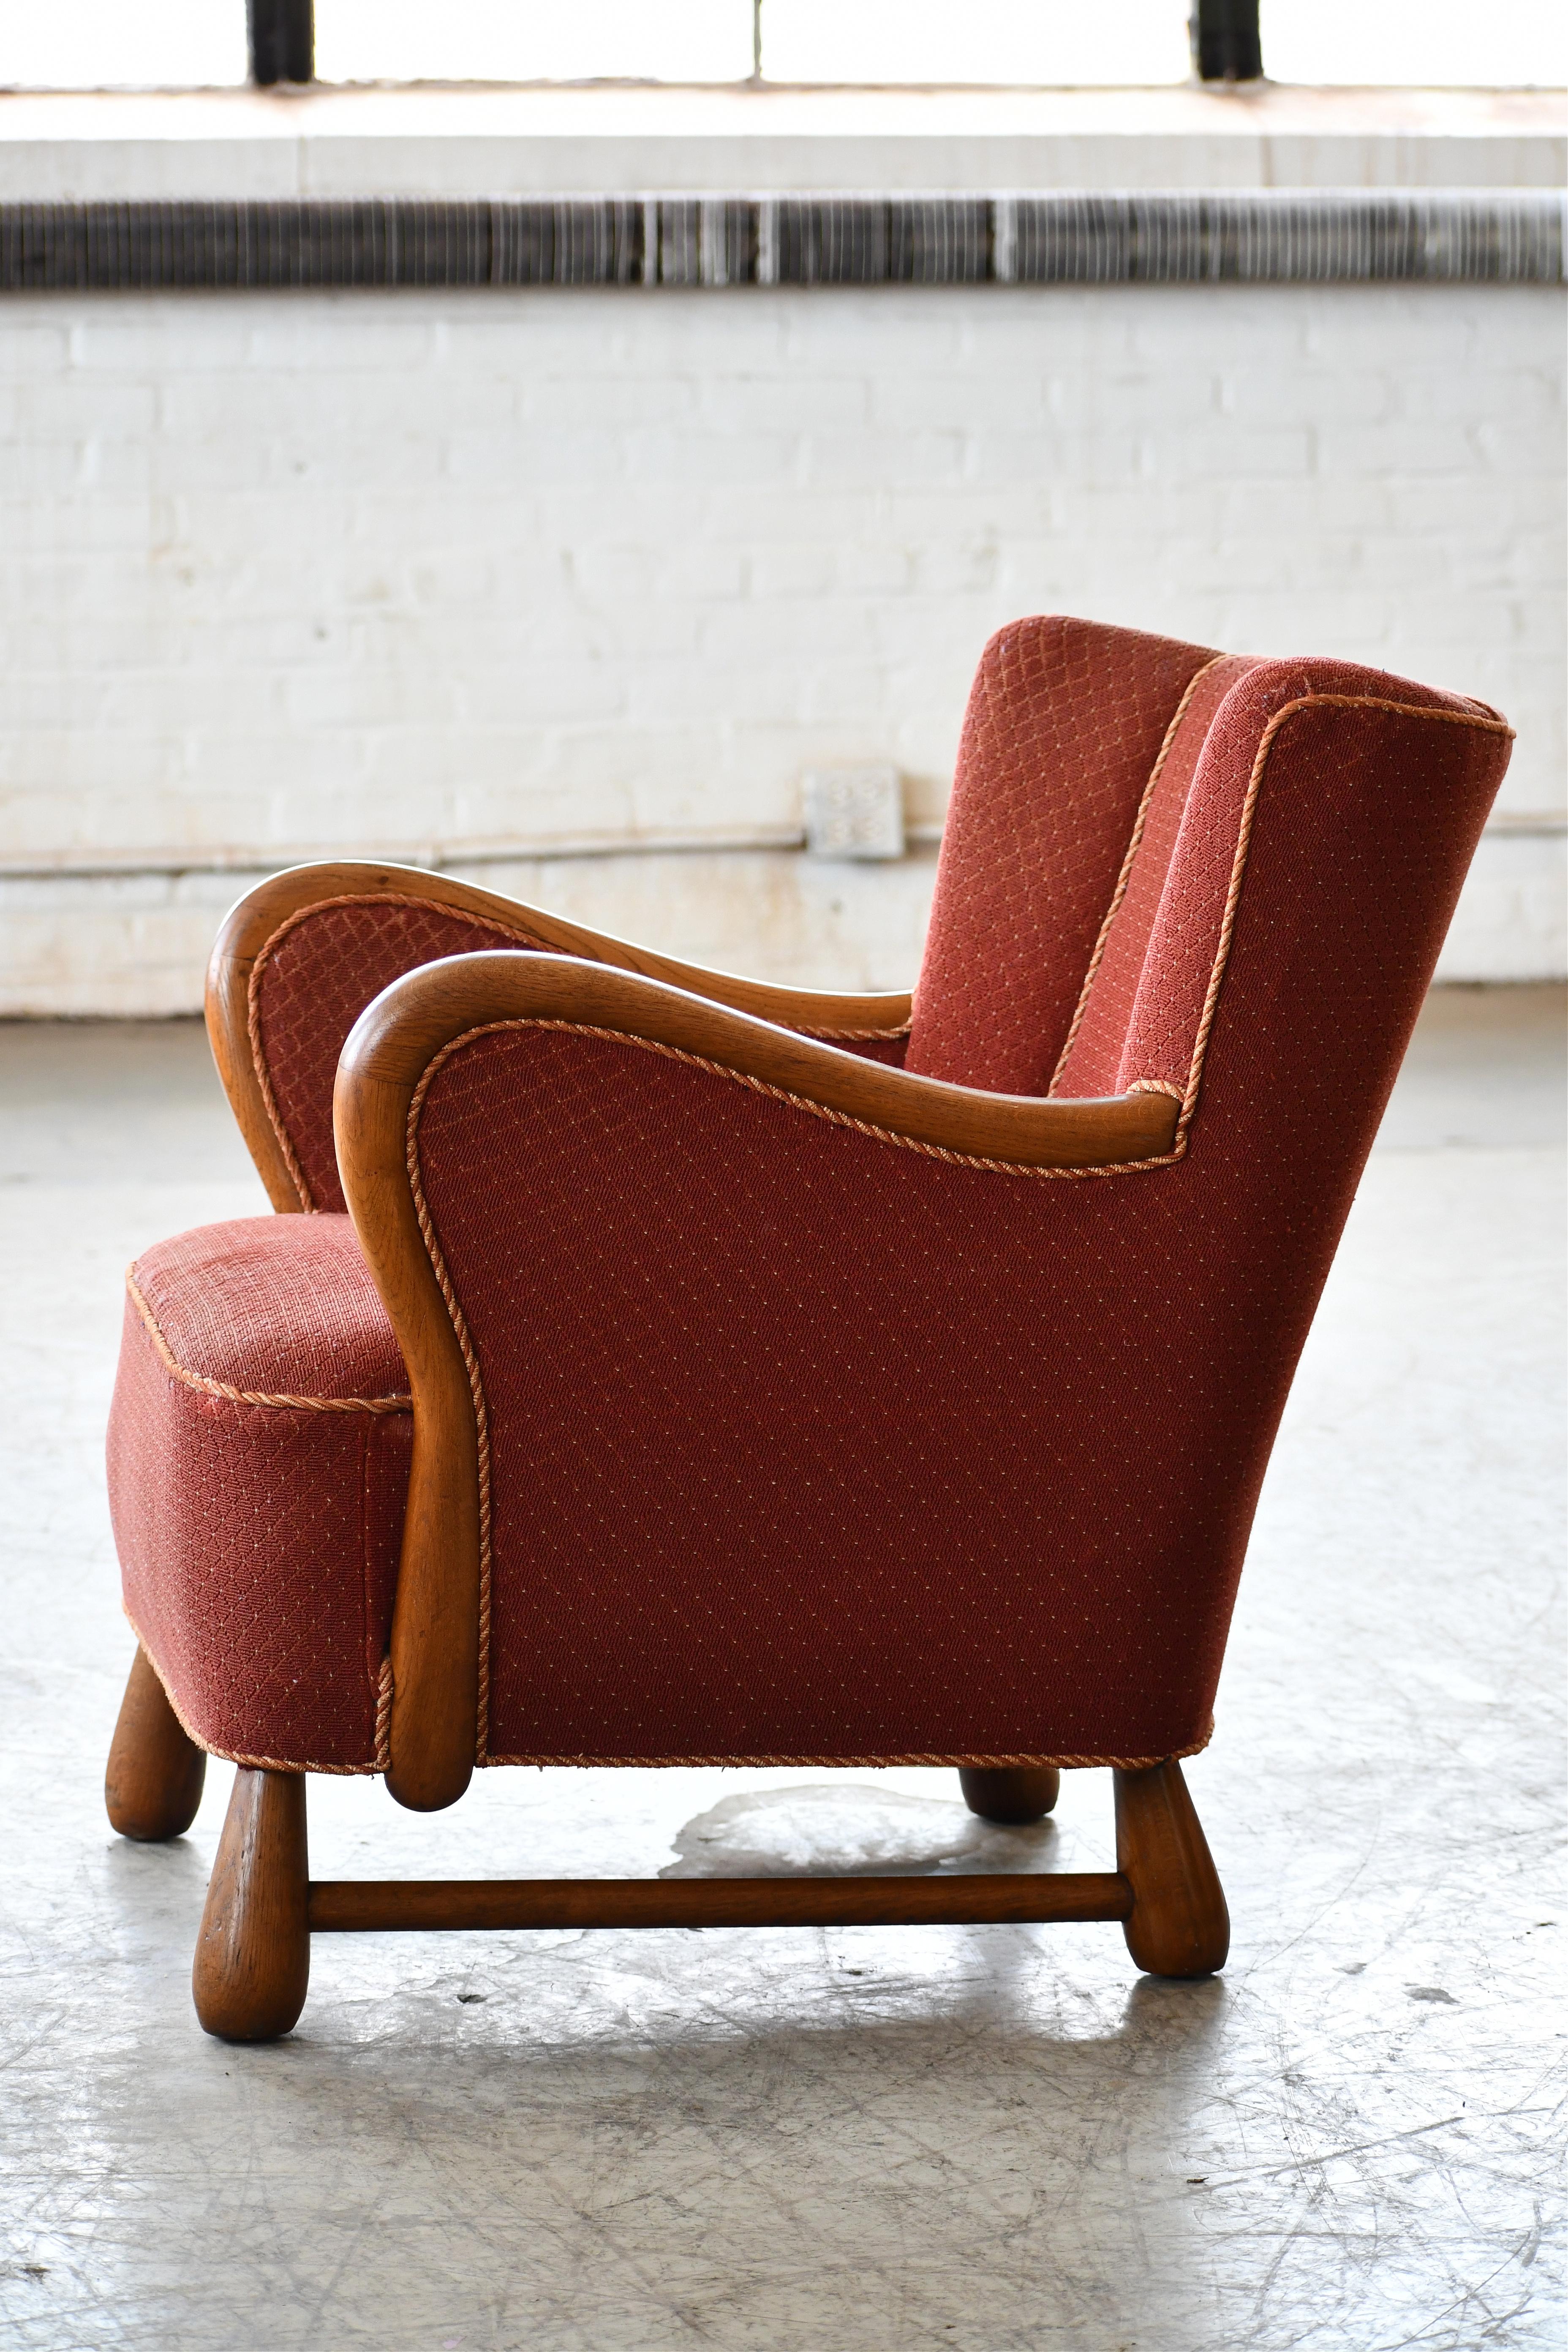 Rare Danish Easy Lounge Chair in Mahogany Attributed to Otto Færge, 1940's For Sale 1